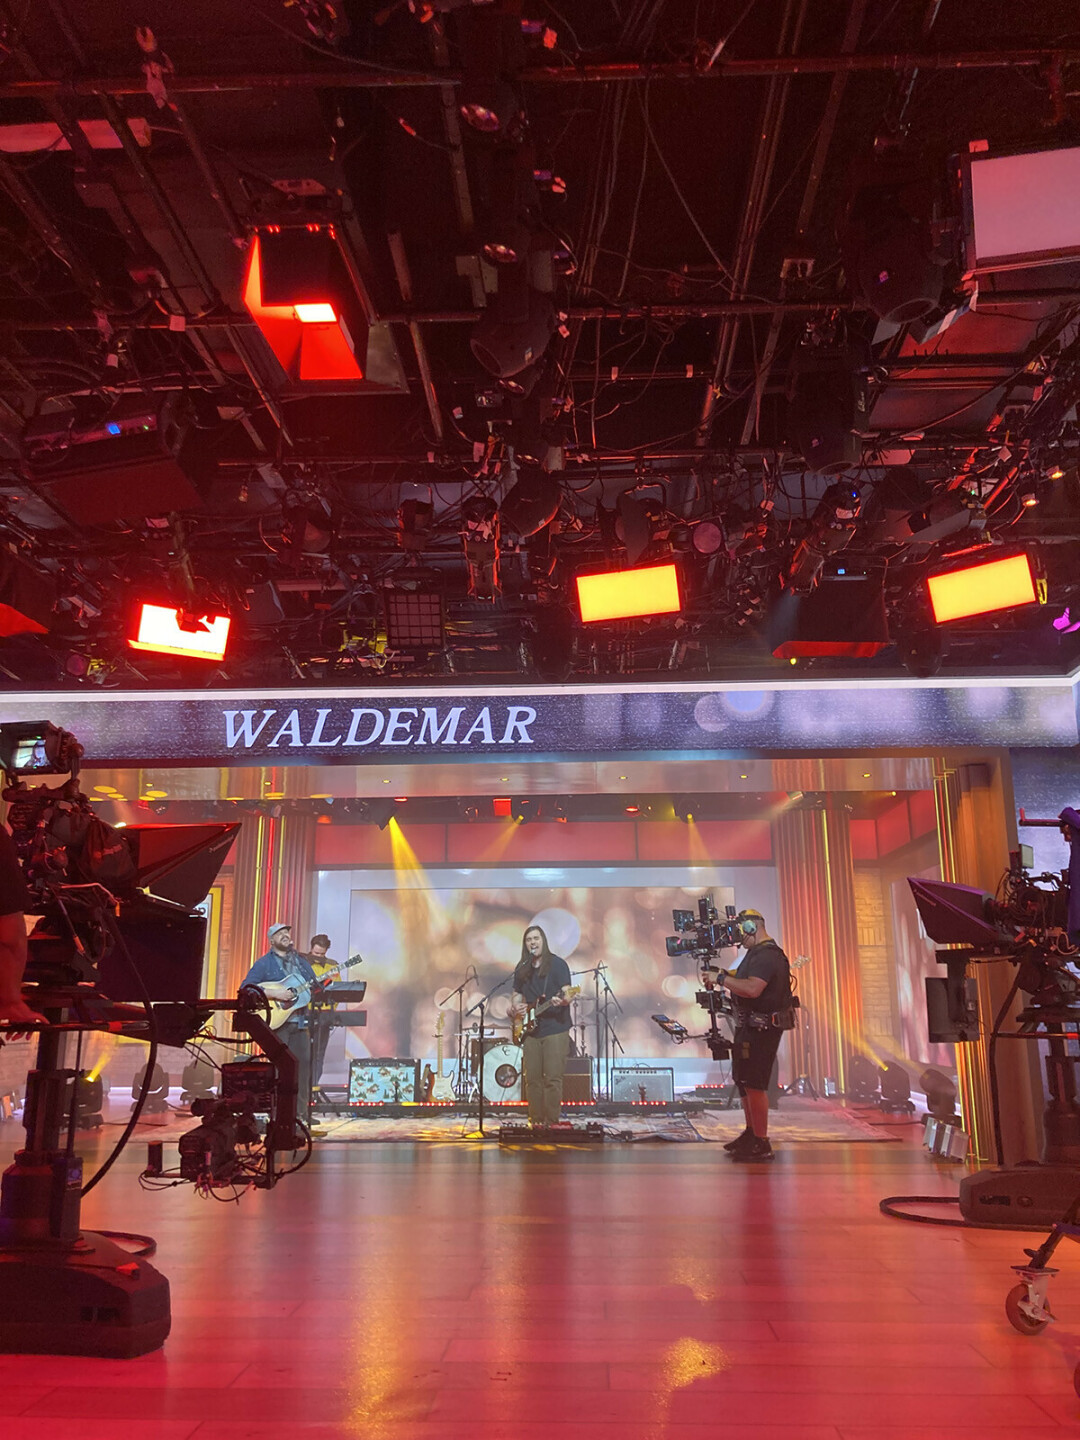 Waldemar performs at CBS Studios in New York on May 17. The show will be broadcast as part of CBS Saturday Morning on Saturday, June 10. (Submitted photo)